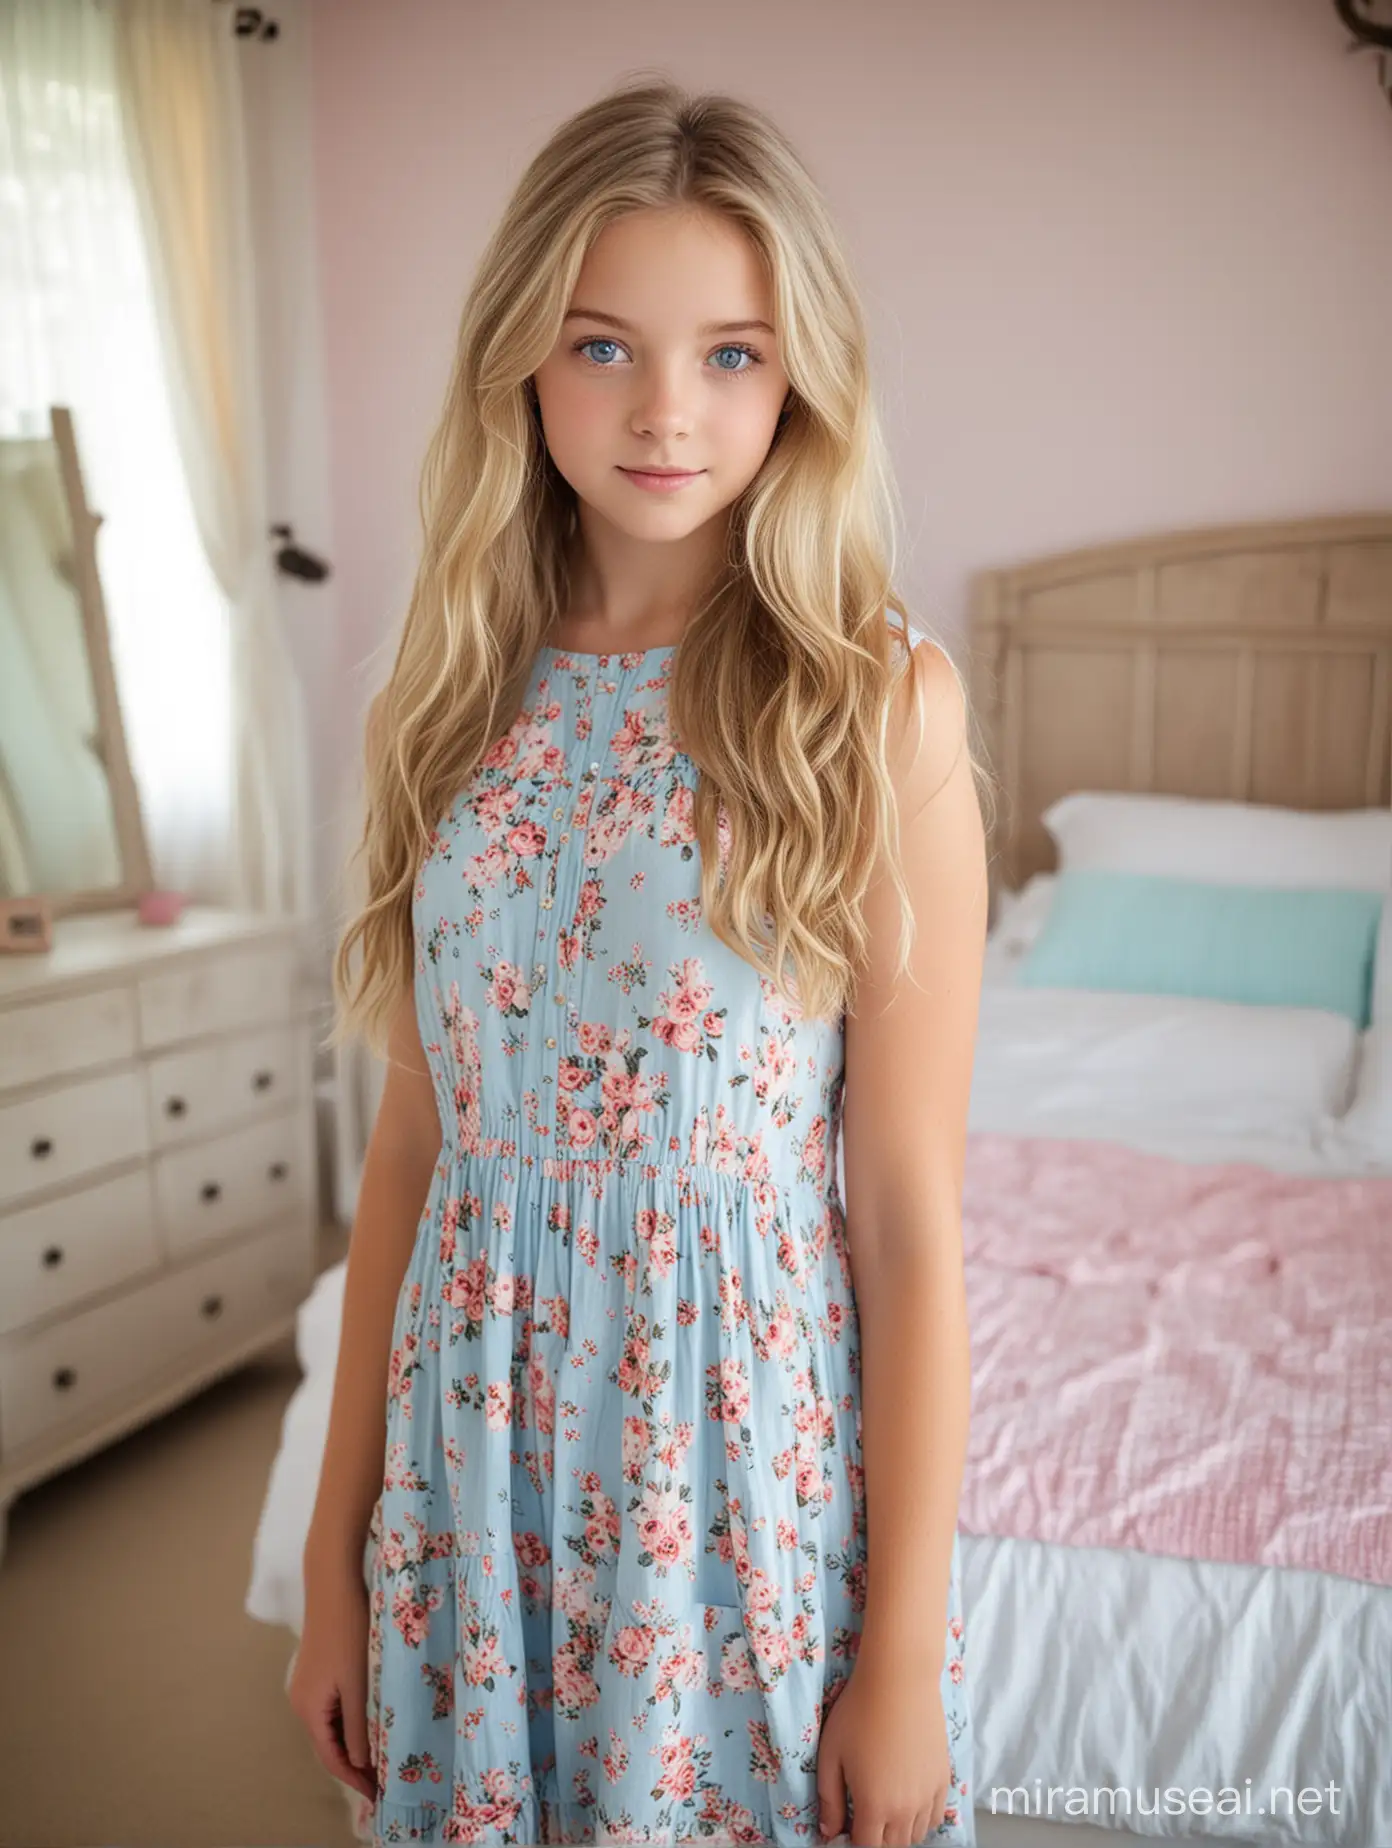 14 year old cute sweet long straight wavy blonde hair blue eyes extremely cute wearing a beautiful sundress in her bedroom full body full view cute bedroom 